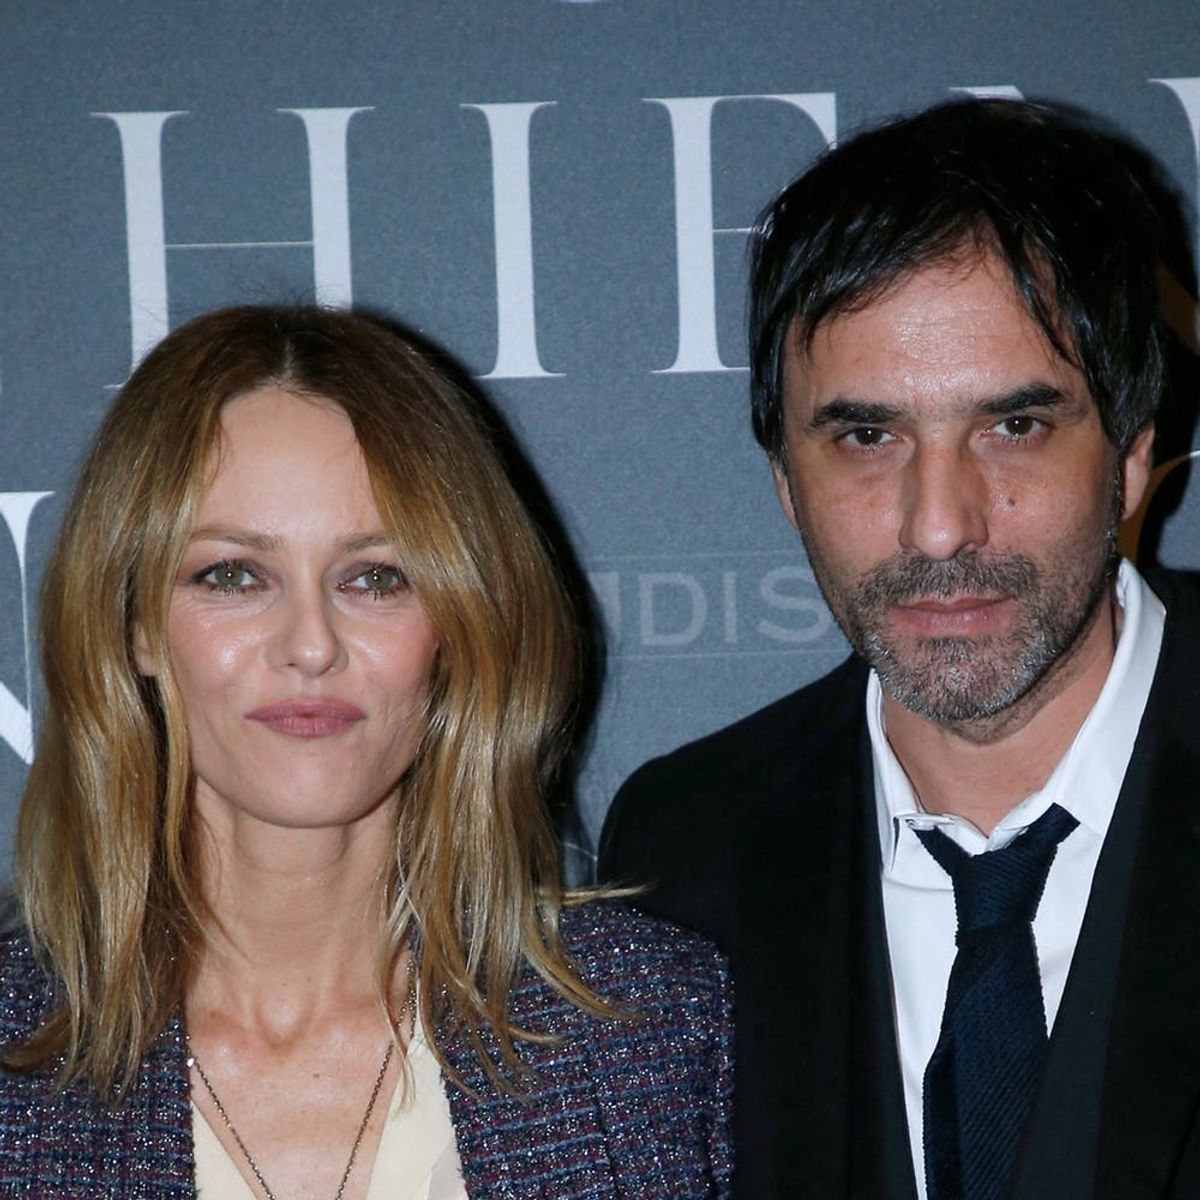 Vanessa Paradis Was the Epitome of French-Girl Chic in Her Gorgeous Wedding Gown